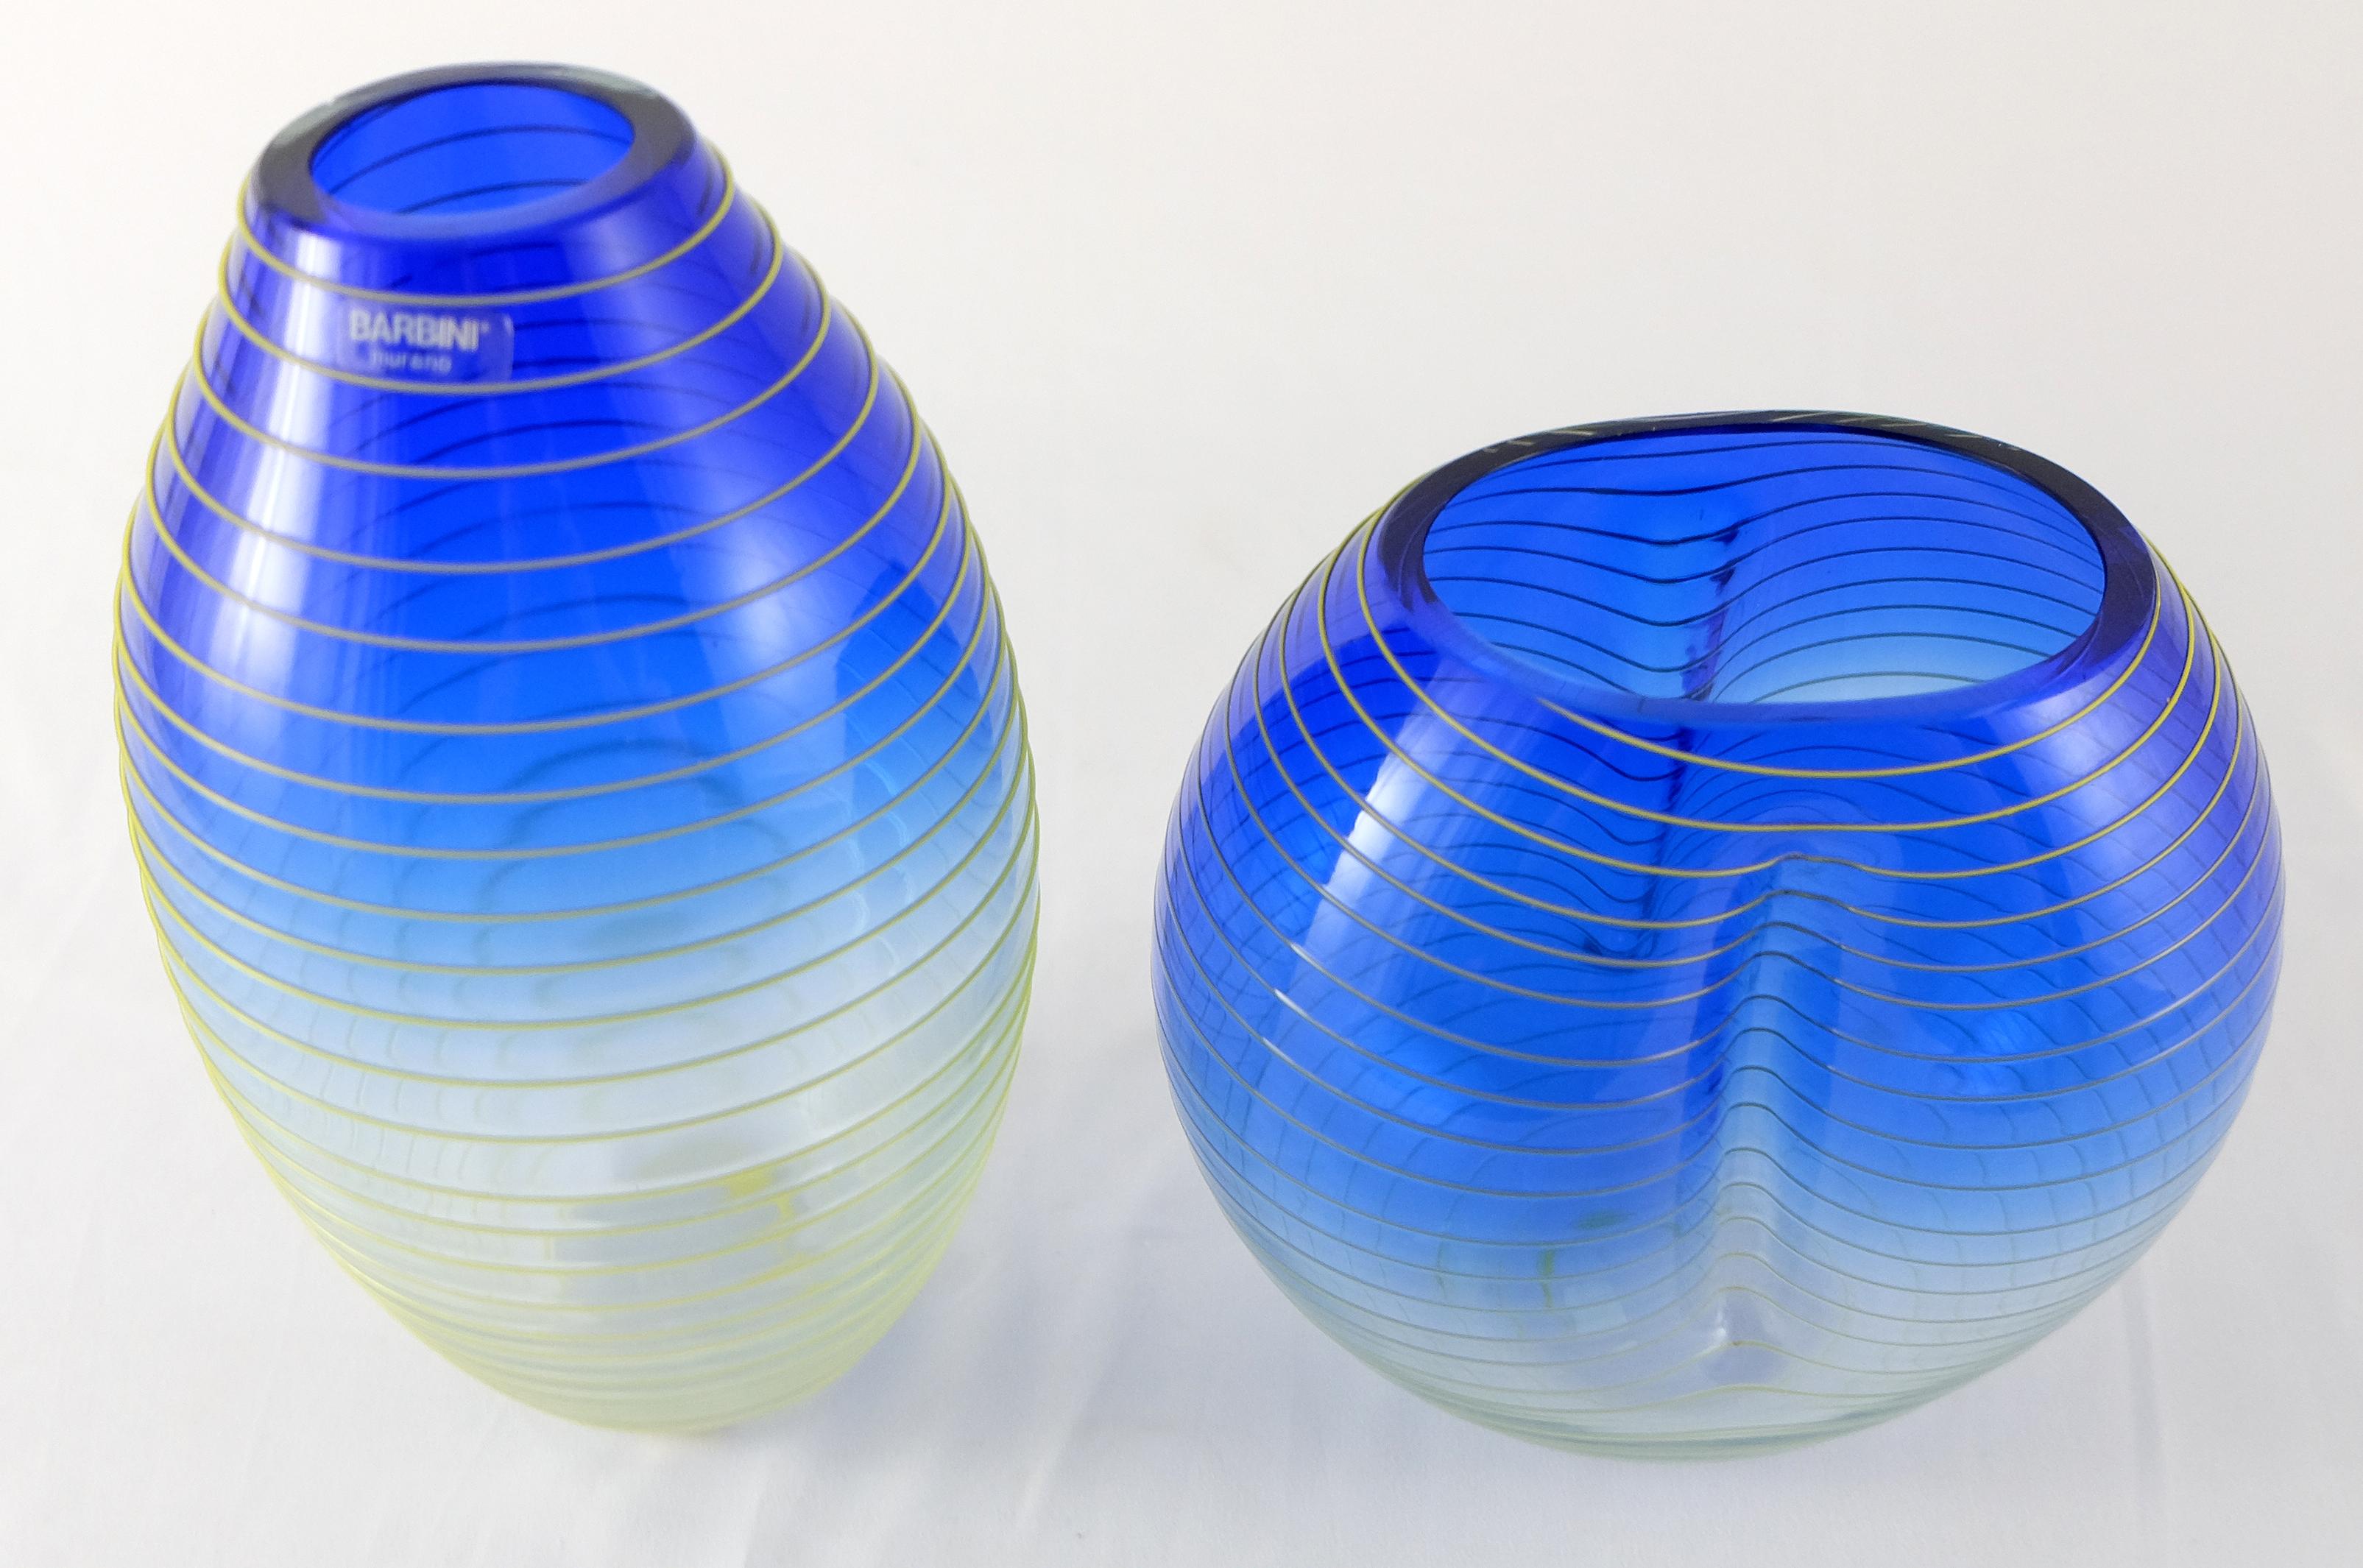 Modern Barbini Murano Yellow and Blue Stripe Glass Vase Set Italy For Sale